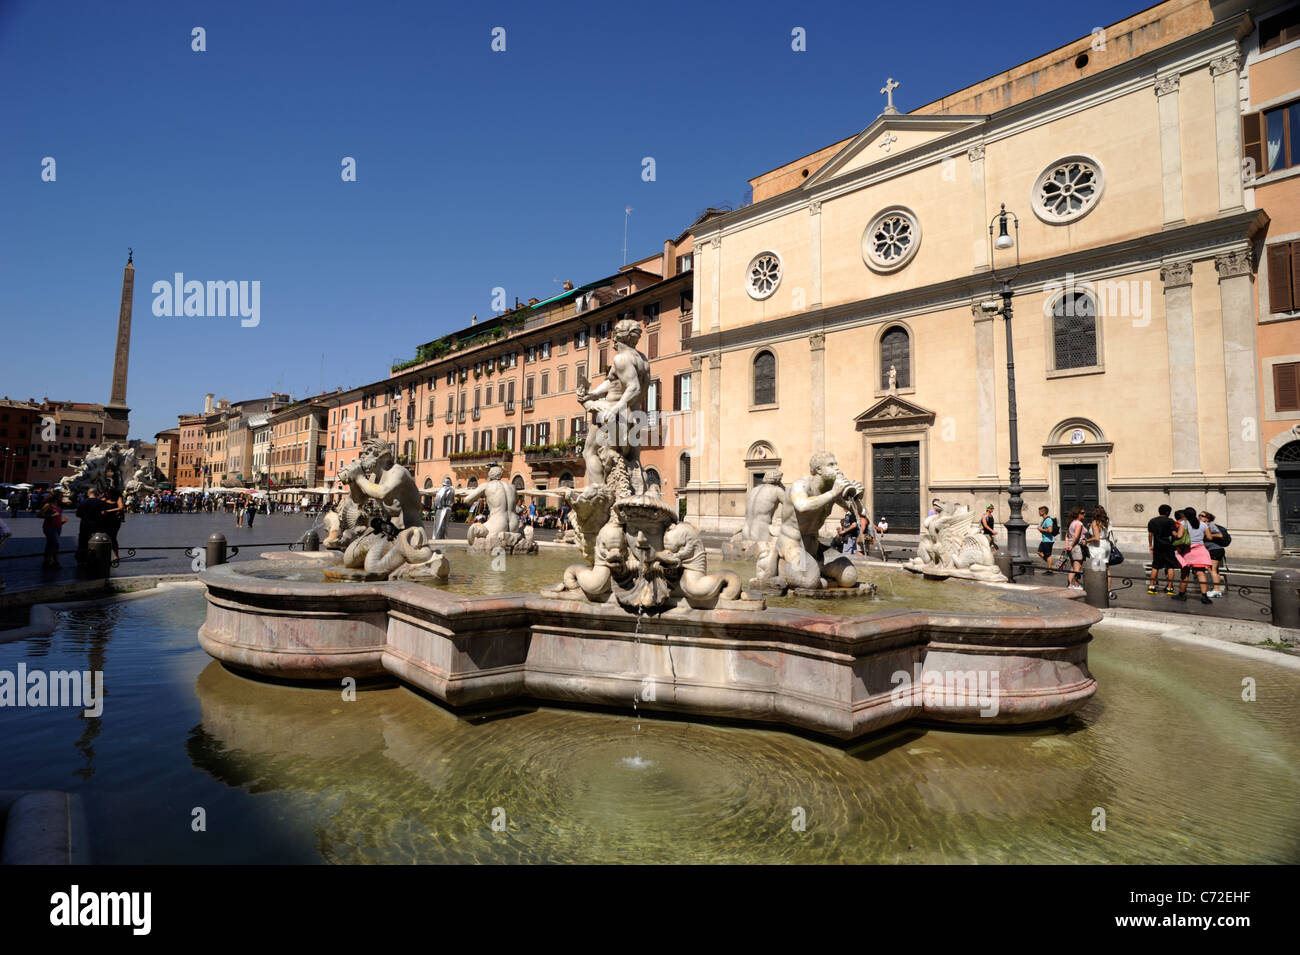 Italy, Rome, Piazza Navona, fountain of the Moor and church of Nostra Signora del Sacro Cuore Stock Photo